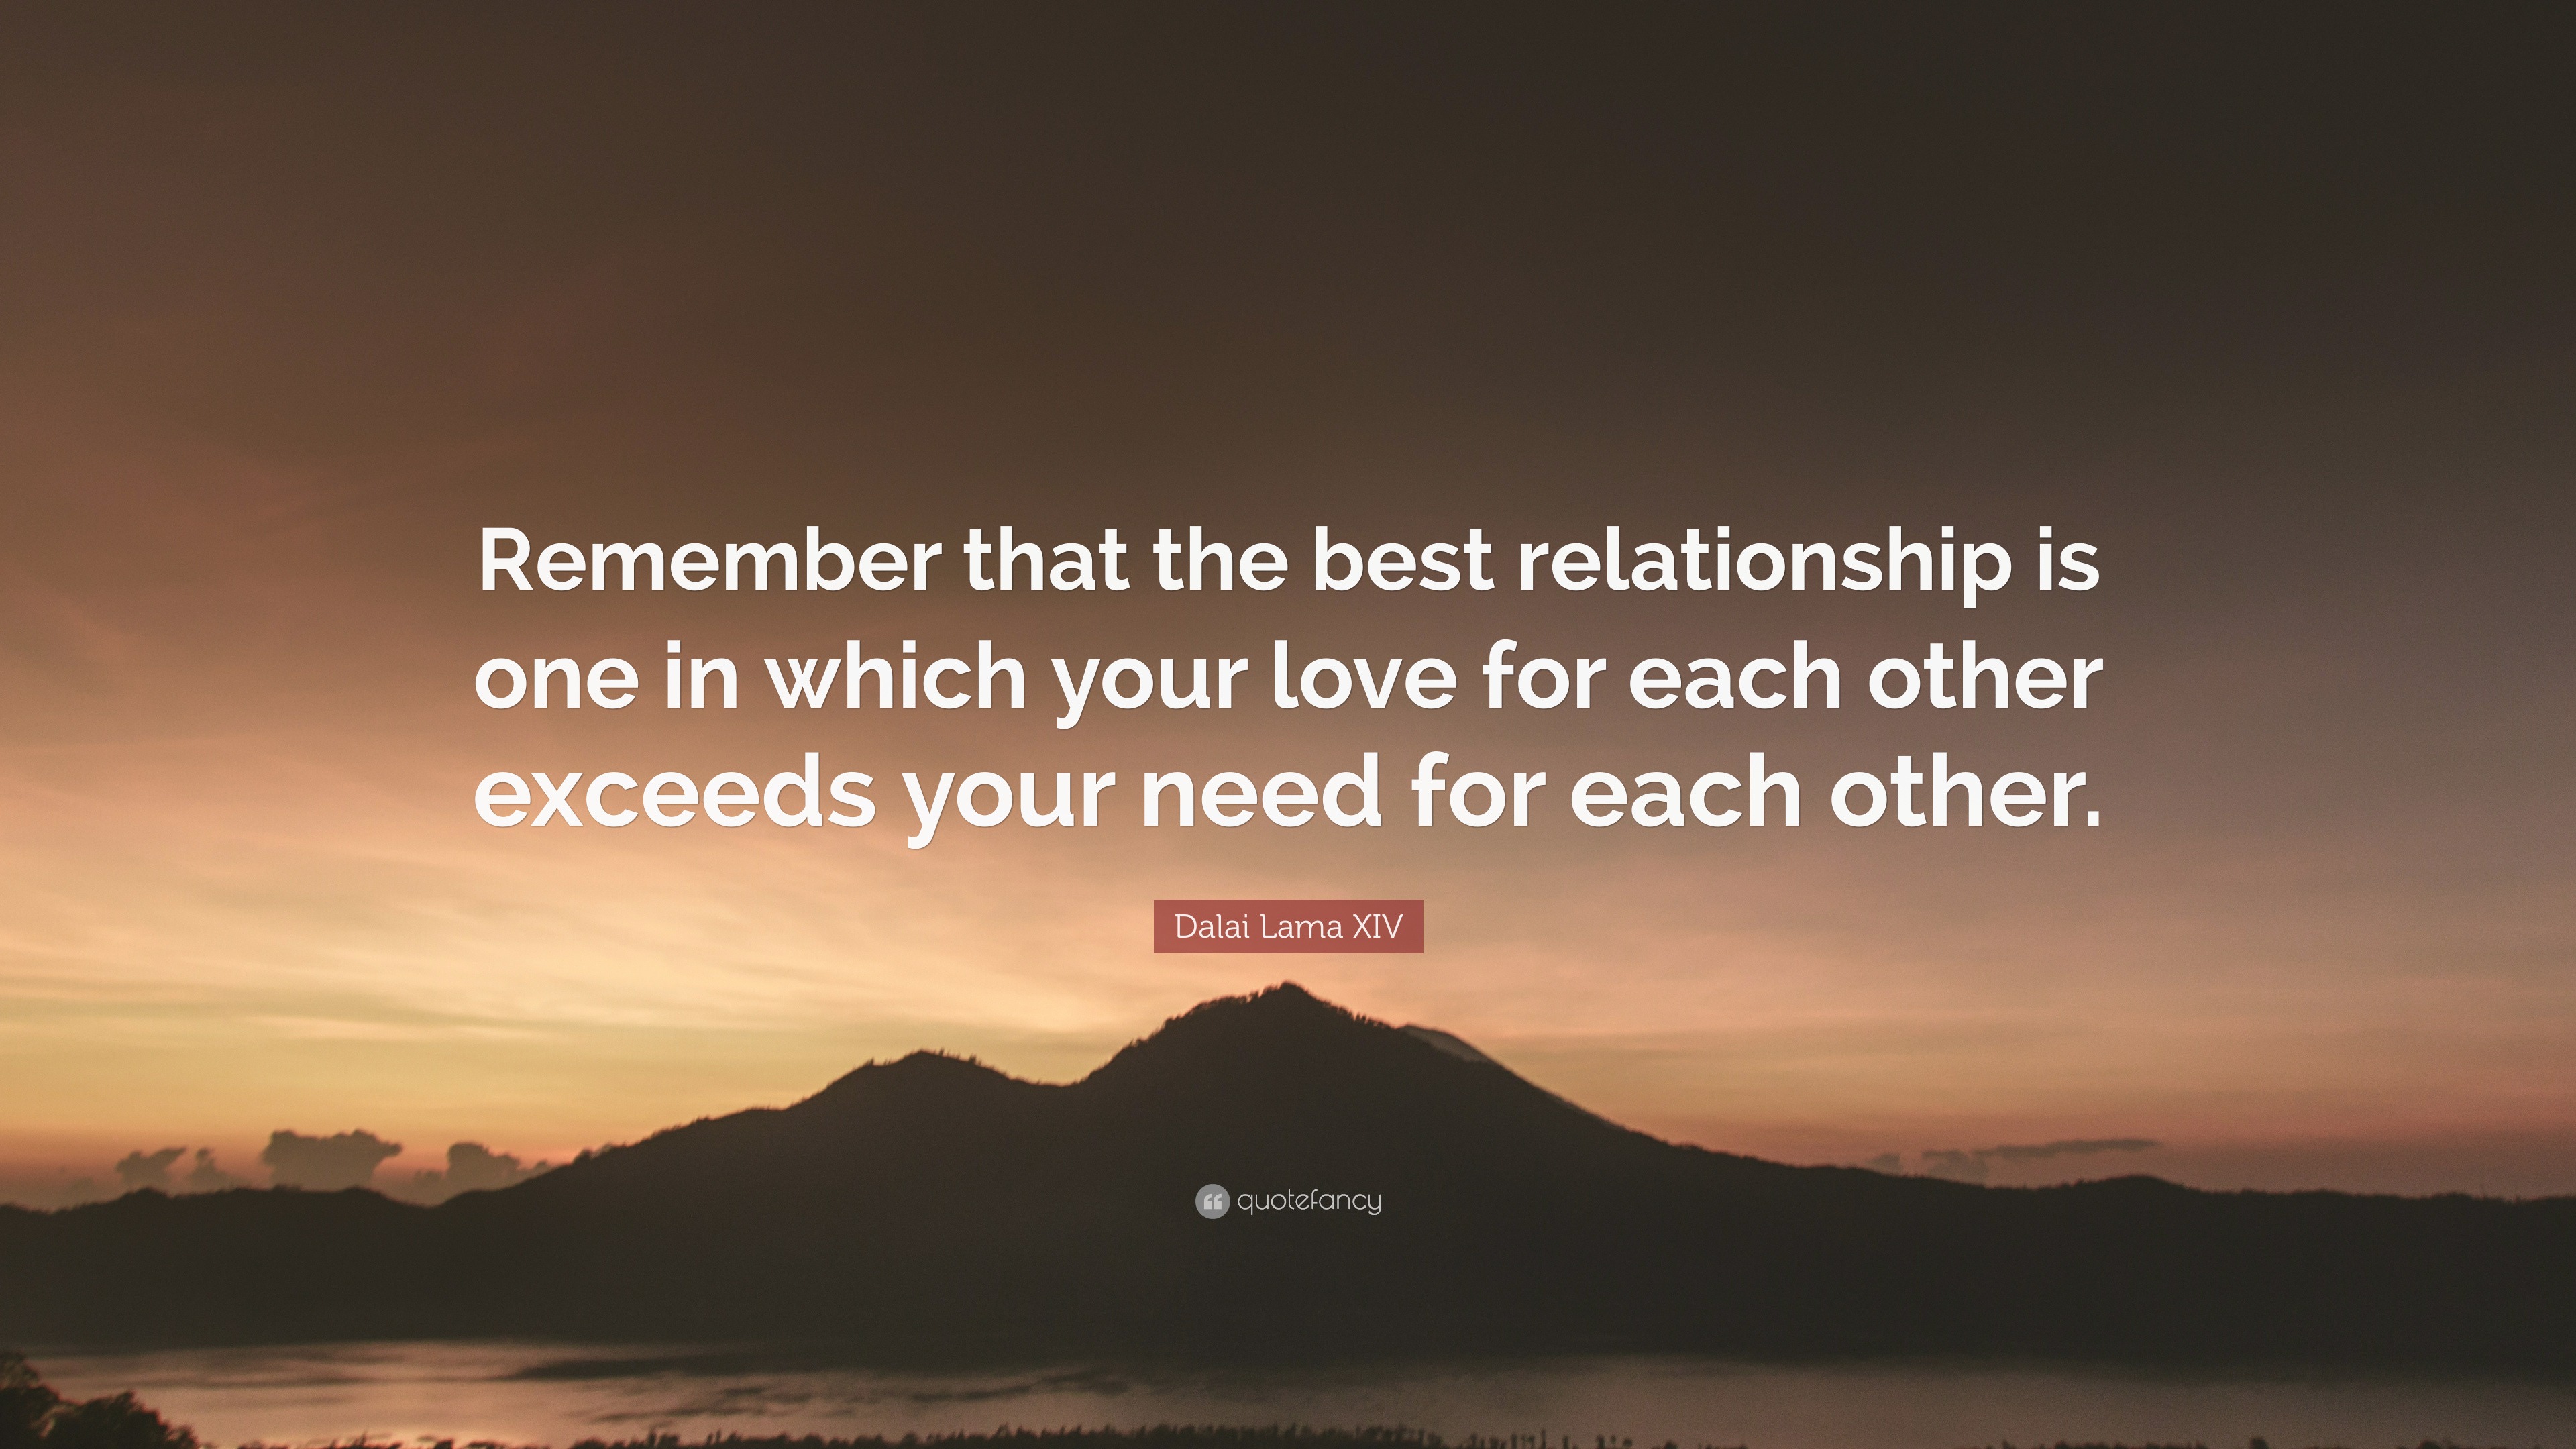 Dalai Lama XIV Quote  Remember that the best relationship 